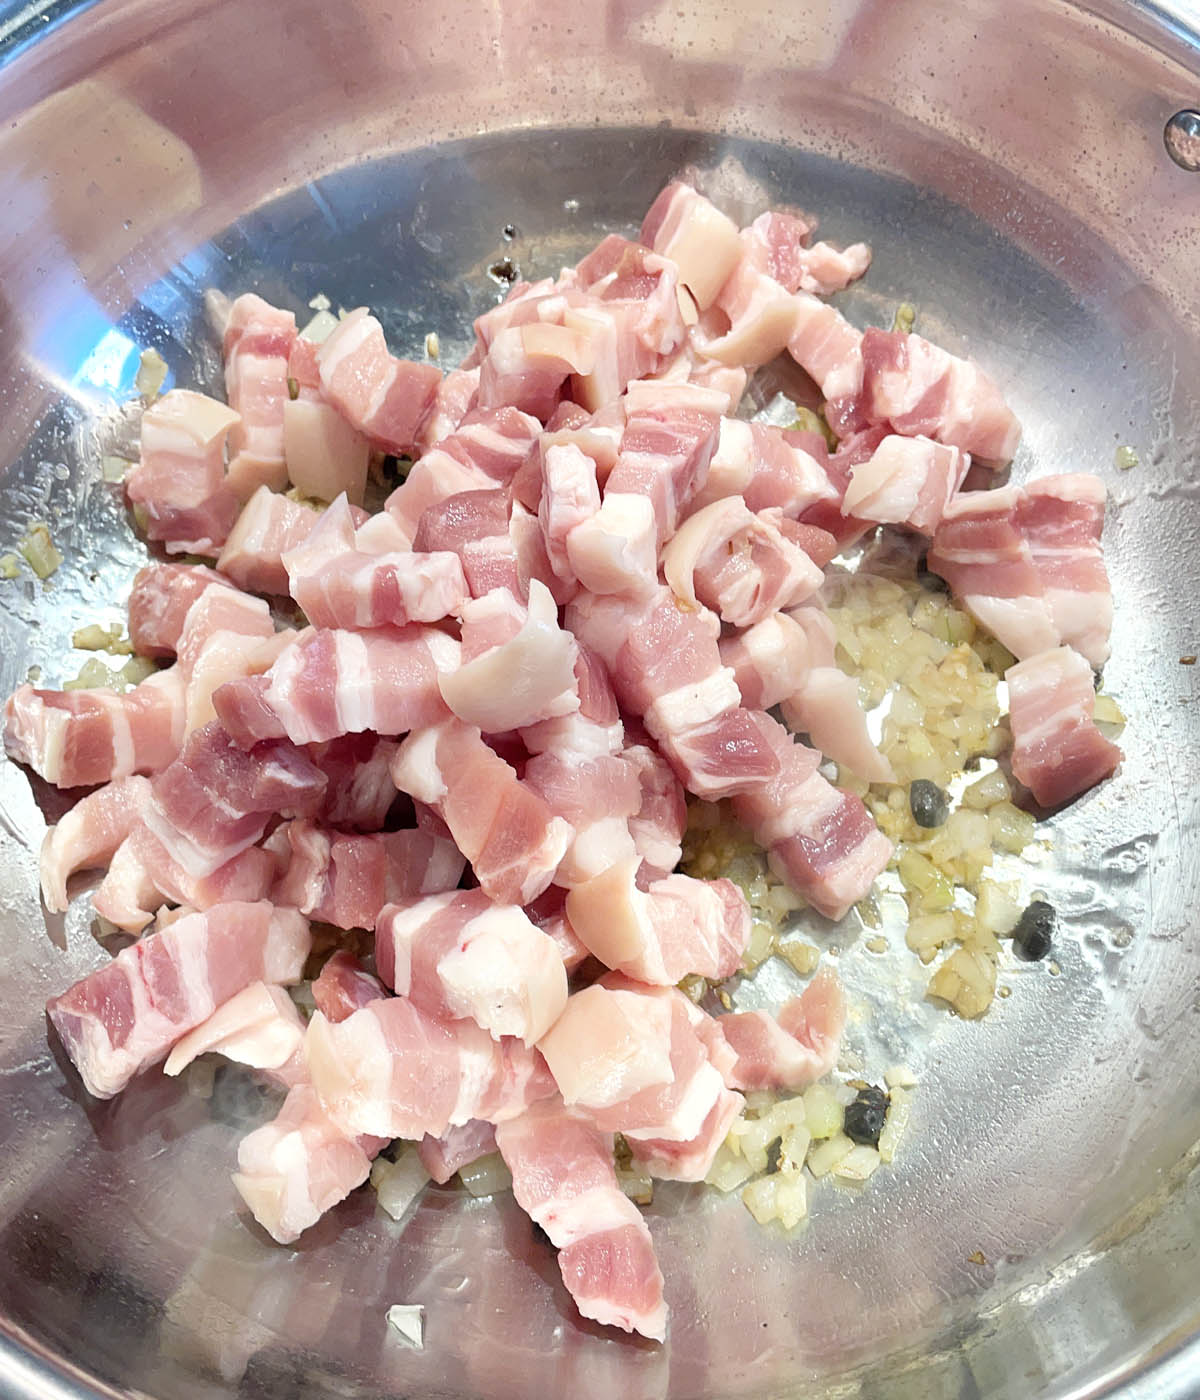 Raw pink pork belly chunks frying in a metal pan.